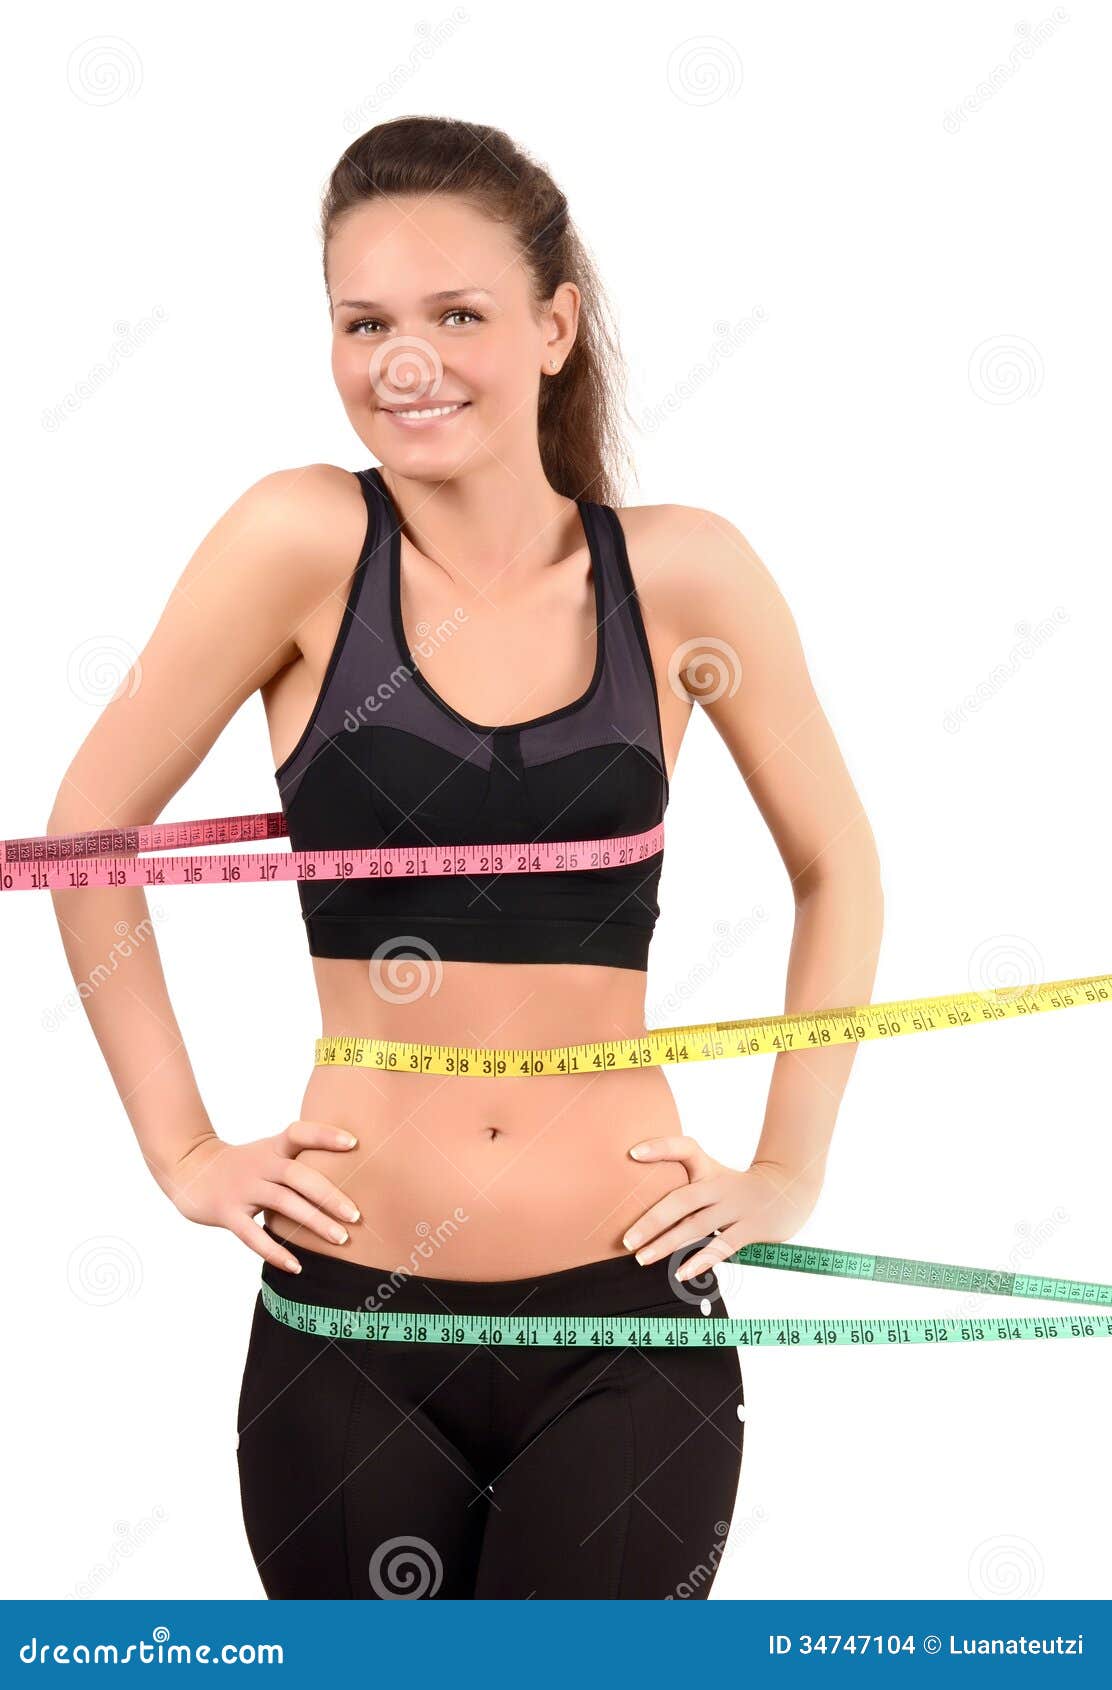 https://thumbs.dreamstime.com/z/measuring-bust-waist-hips-beautiful-fit-girl-wrapped-three-measuring-tapes-inch-happy-measurements-isolated-white-34747104.jpg